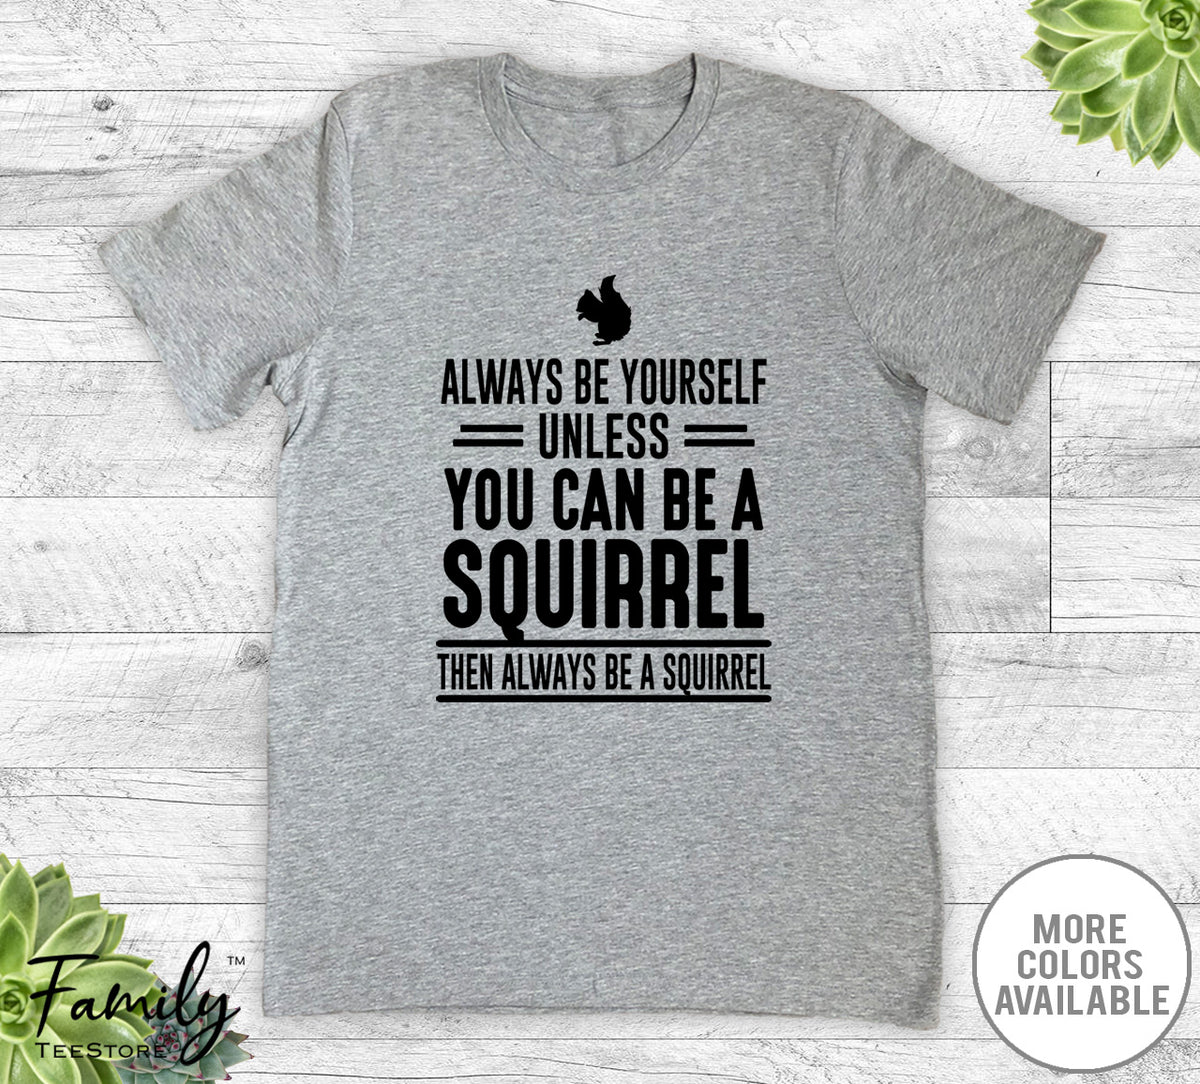 Always Be Yourself Unless You Can Be A Squirrel - Unisex T-shirt - Squirrel Shirt - Squirrel Gift - familyteeprints